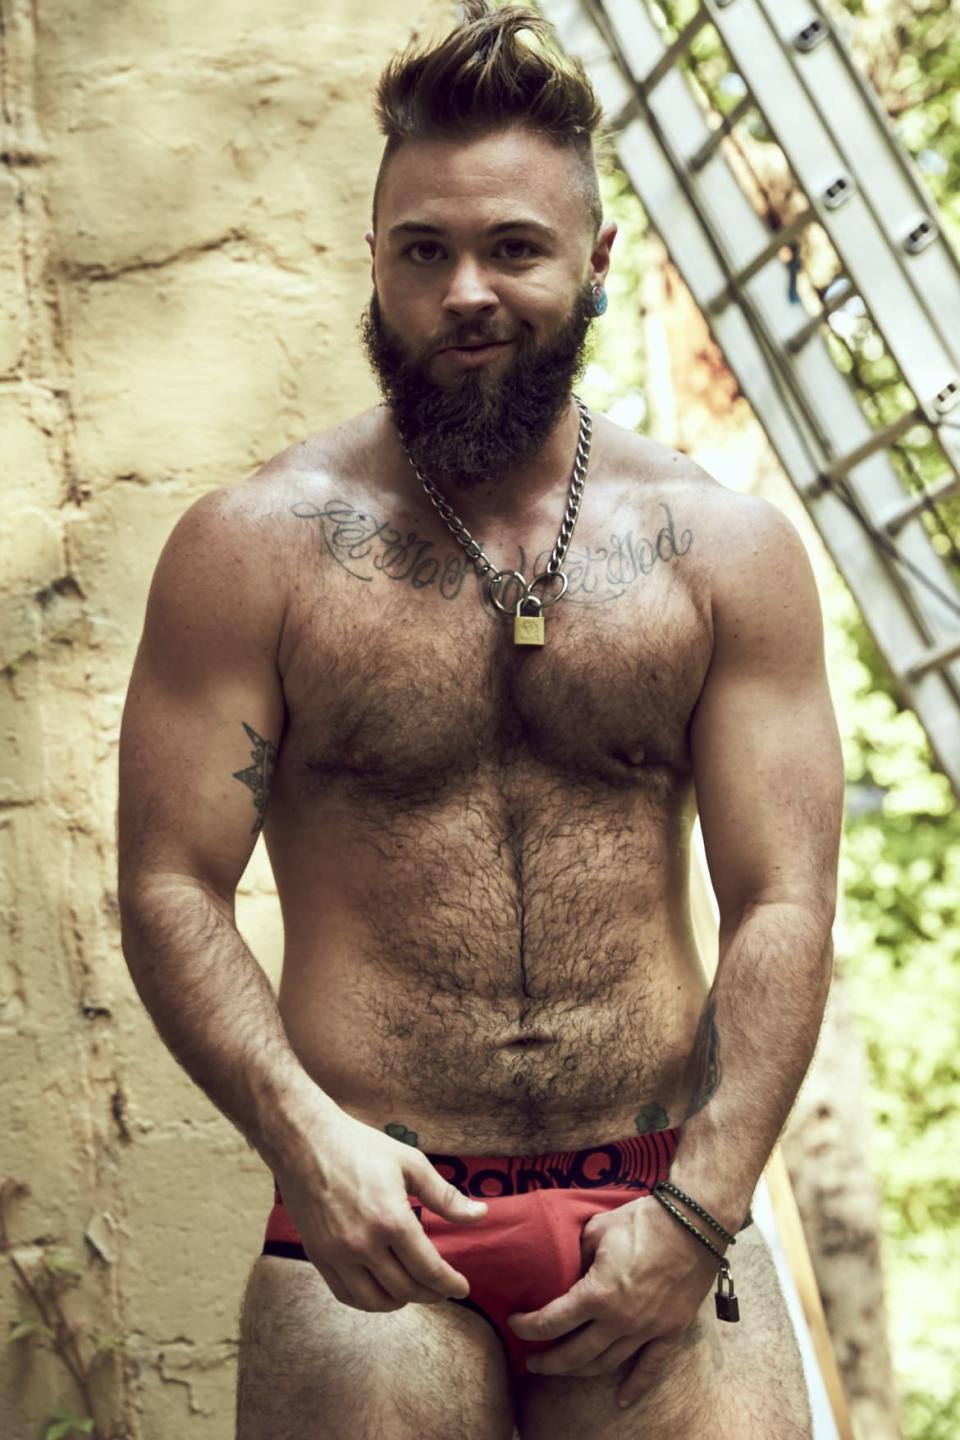 <div class="inline-image__caption"><p>Rufio! What an amazing bundle of body building bear-like brilliance! Rufio is so full of life and spirit. He’s also a staunch feminist, especially with his experience of white male privilege that came with passing.</p></div> <div class="inline-image__credit">Soraya Zaman</div>